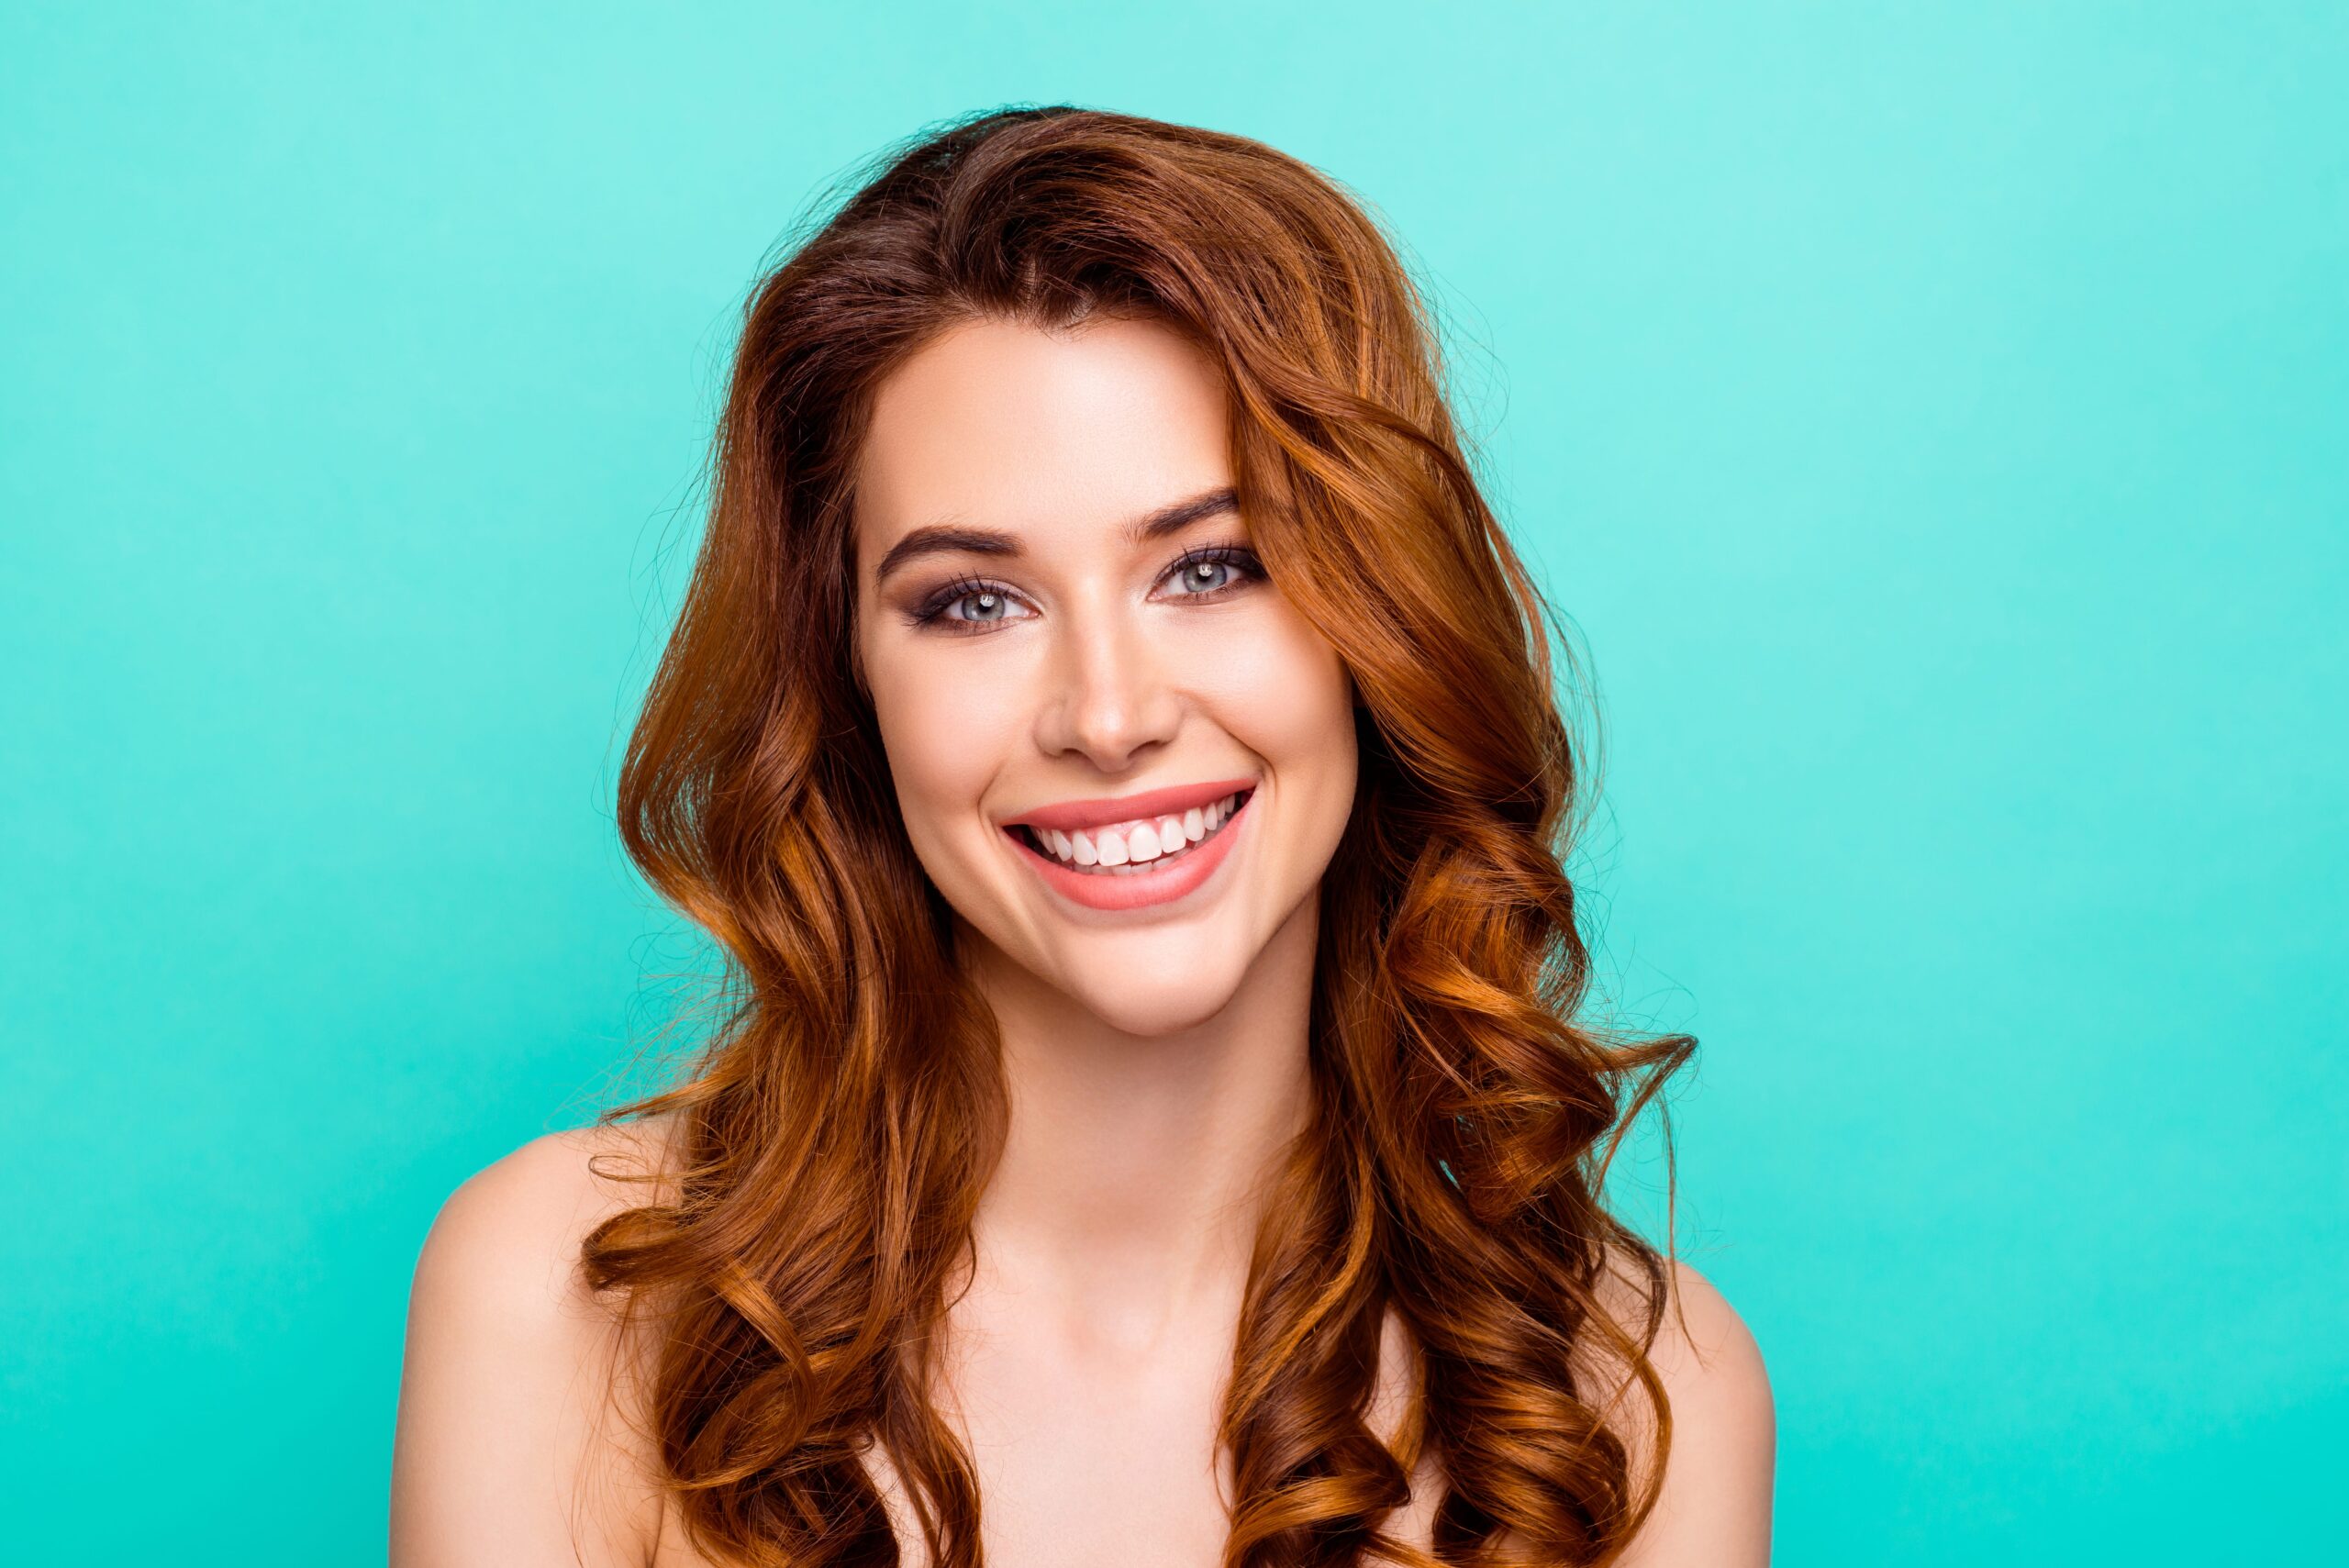 redhead smiling against teal background